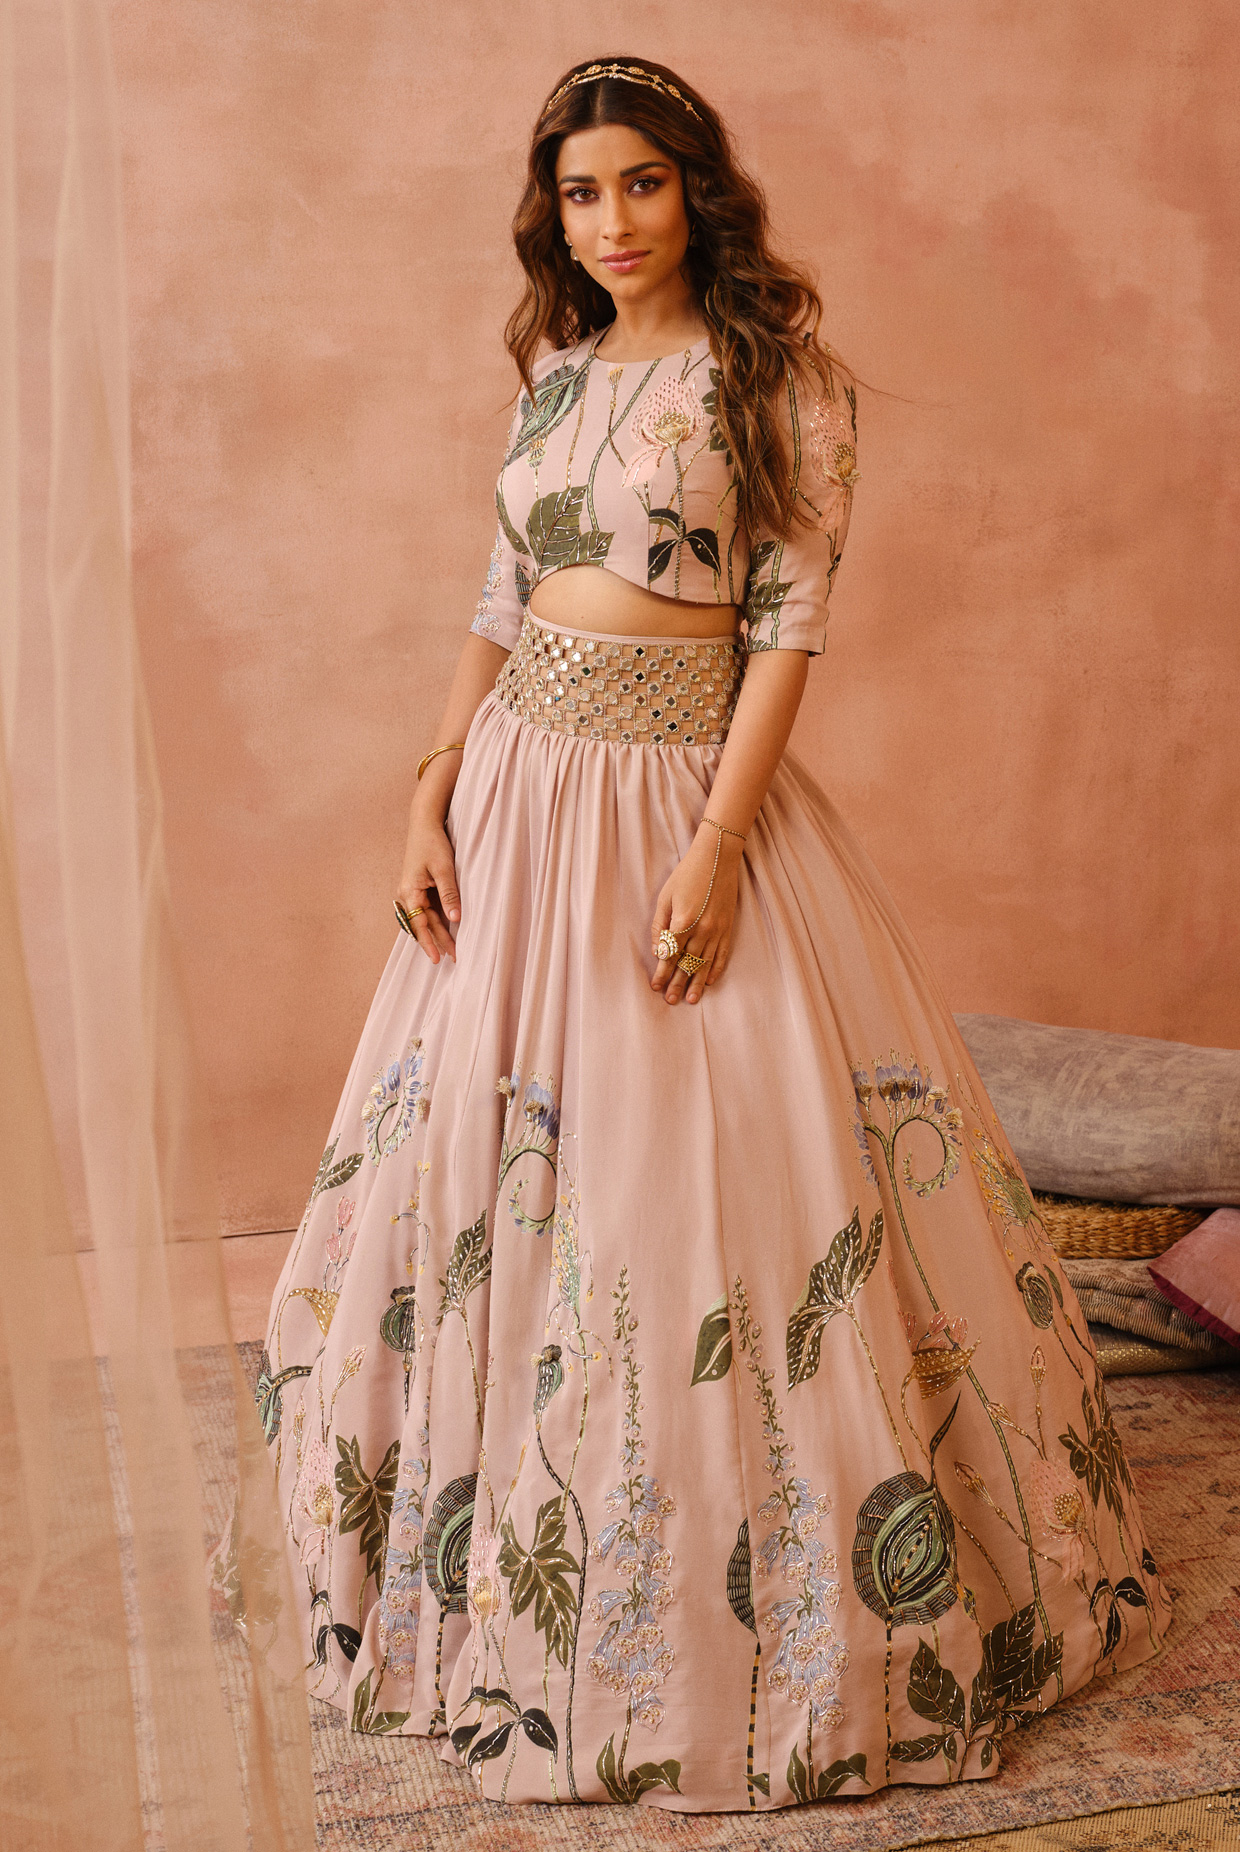 Ideas and Tips For Re-Using Your Old Lehenga Choli in New Ways